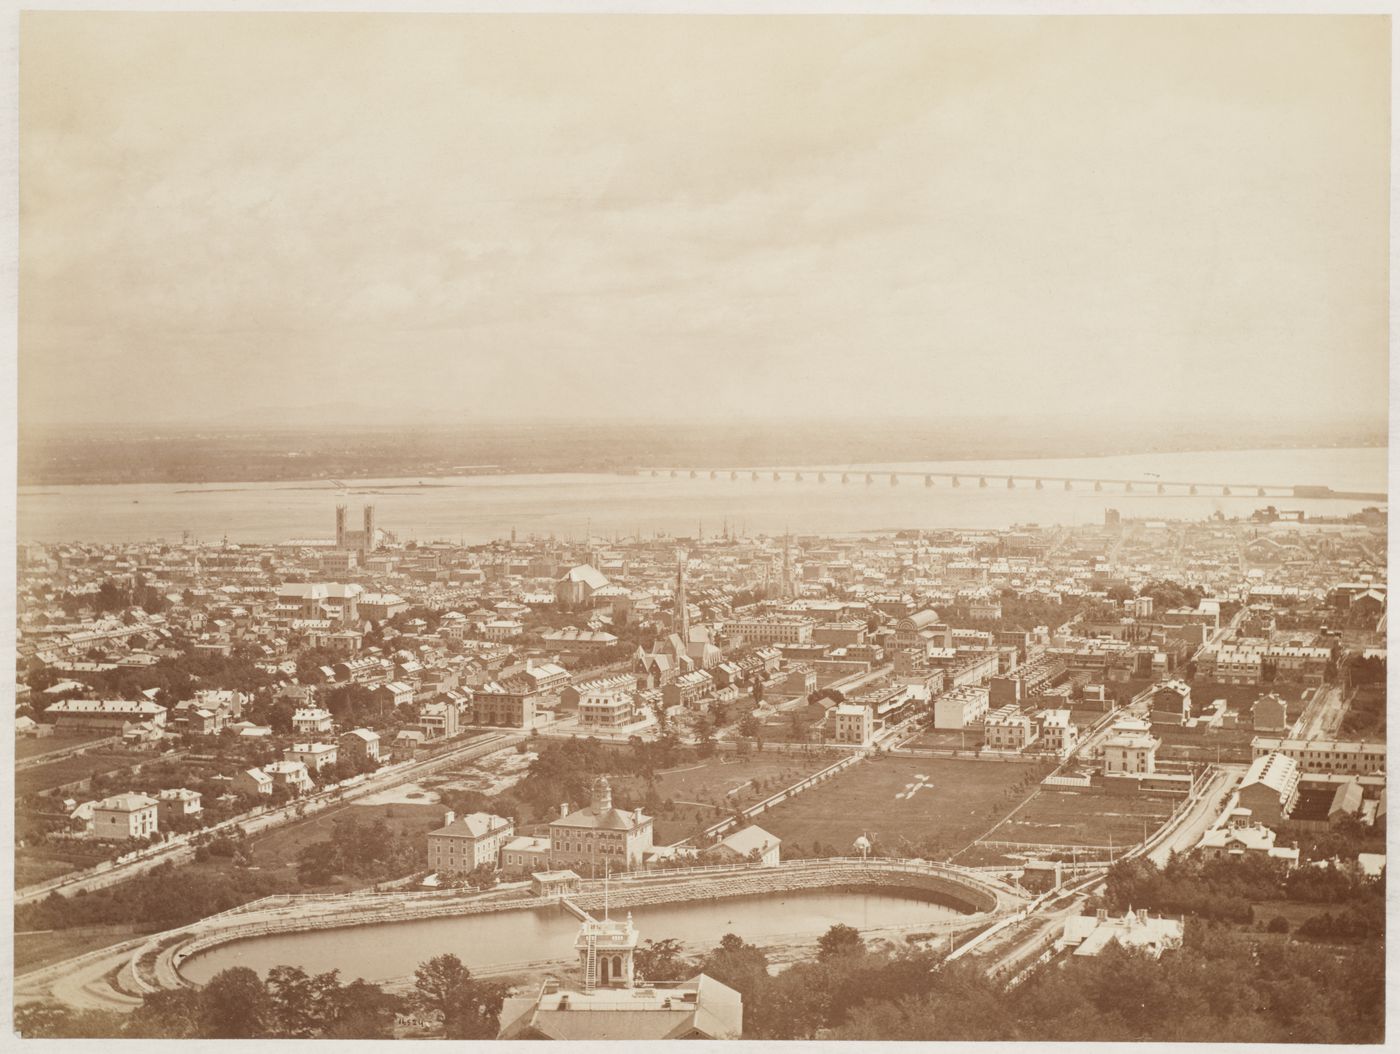 View of Montréal from Mount Royal with Victoria Bridge on the right, Canada (now Montréal, Québec, Canada)